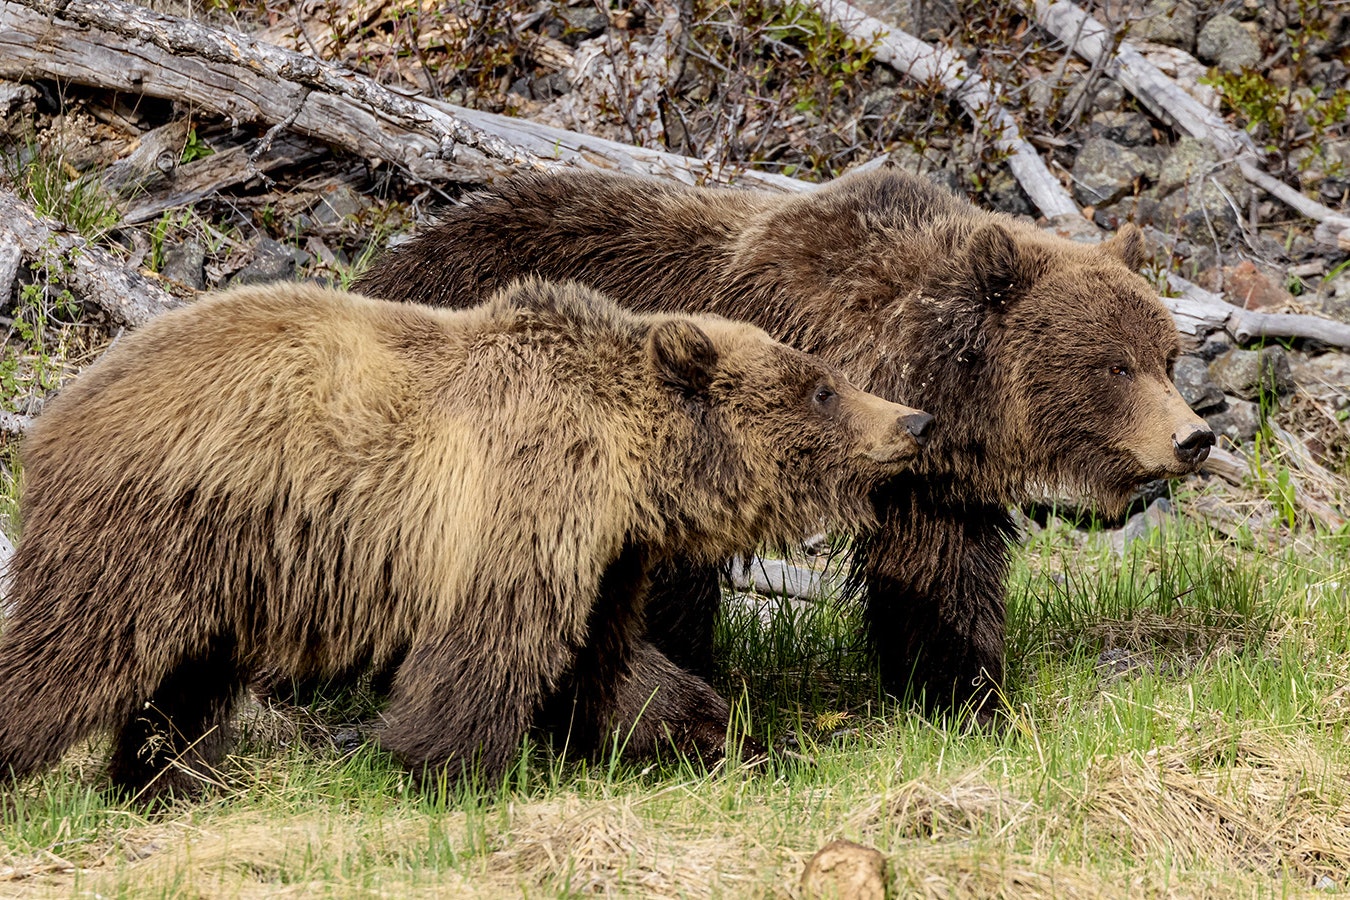 A pair of Wyoming grizzlies in the Yellowstone Ecosystem.